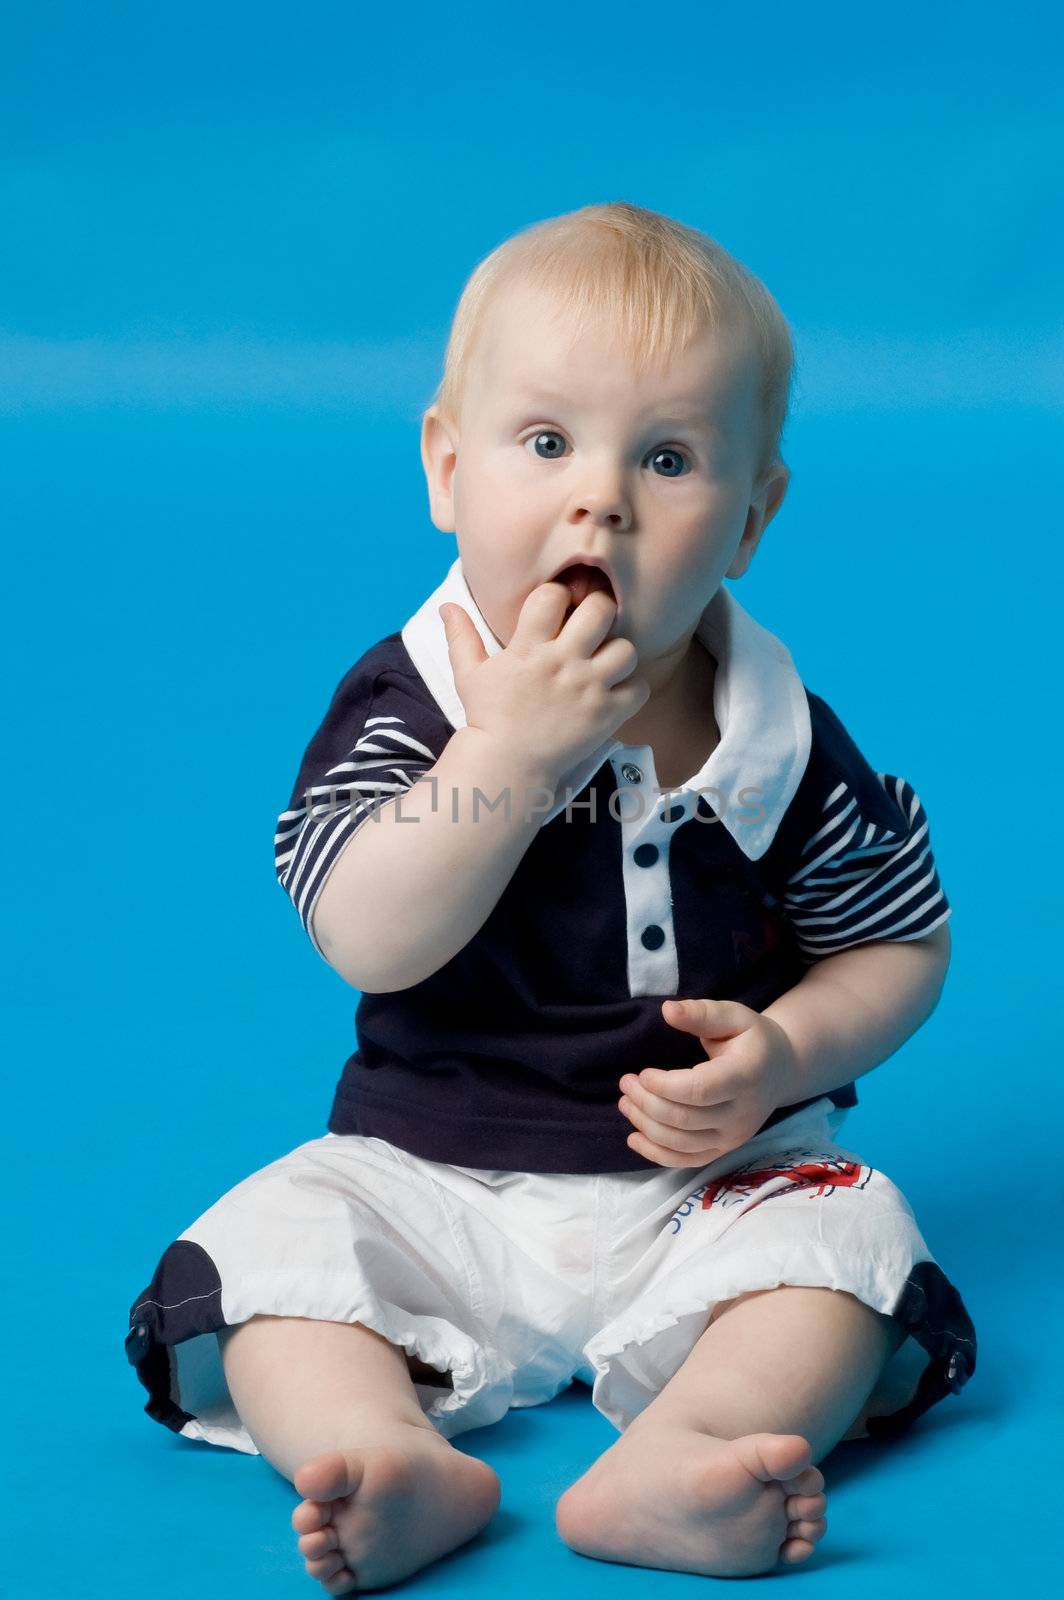 The small smiling child in studio, on a blue background